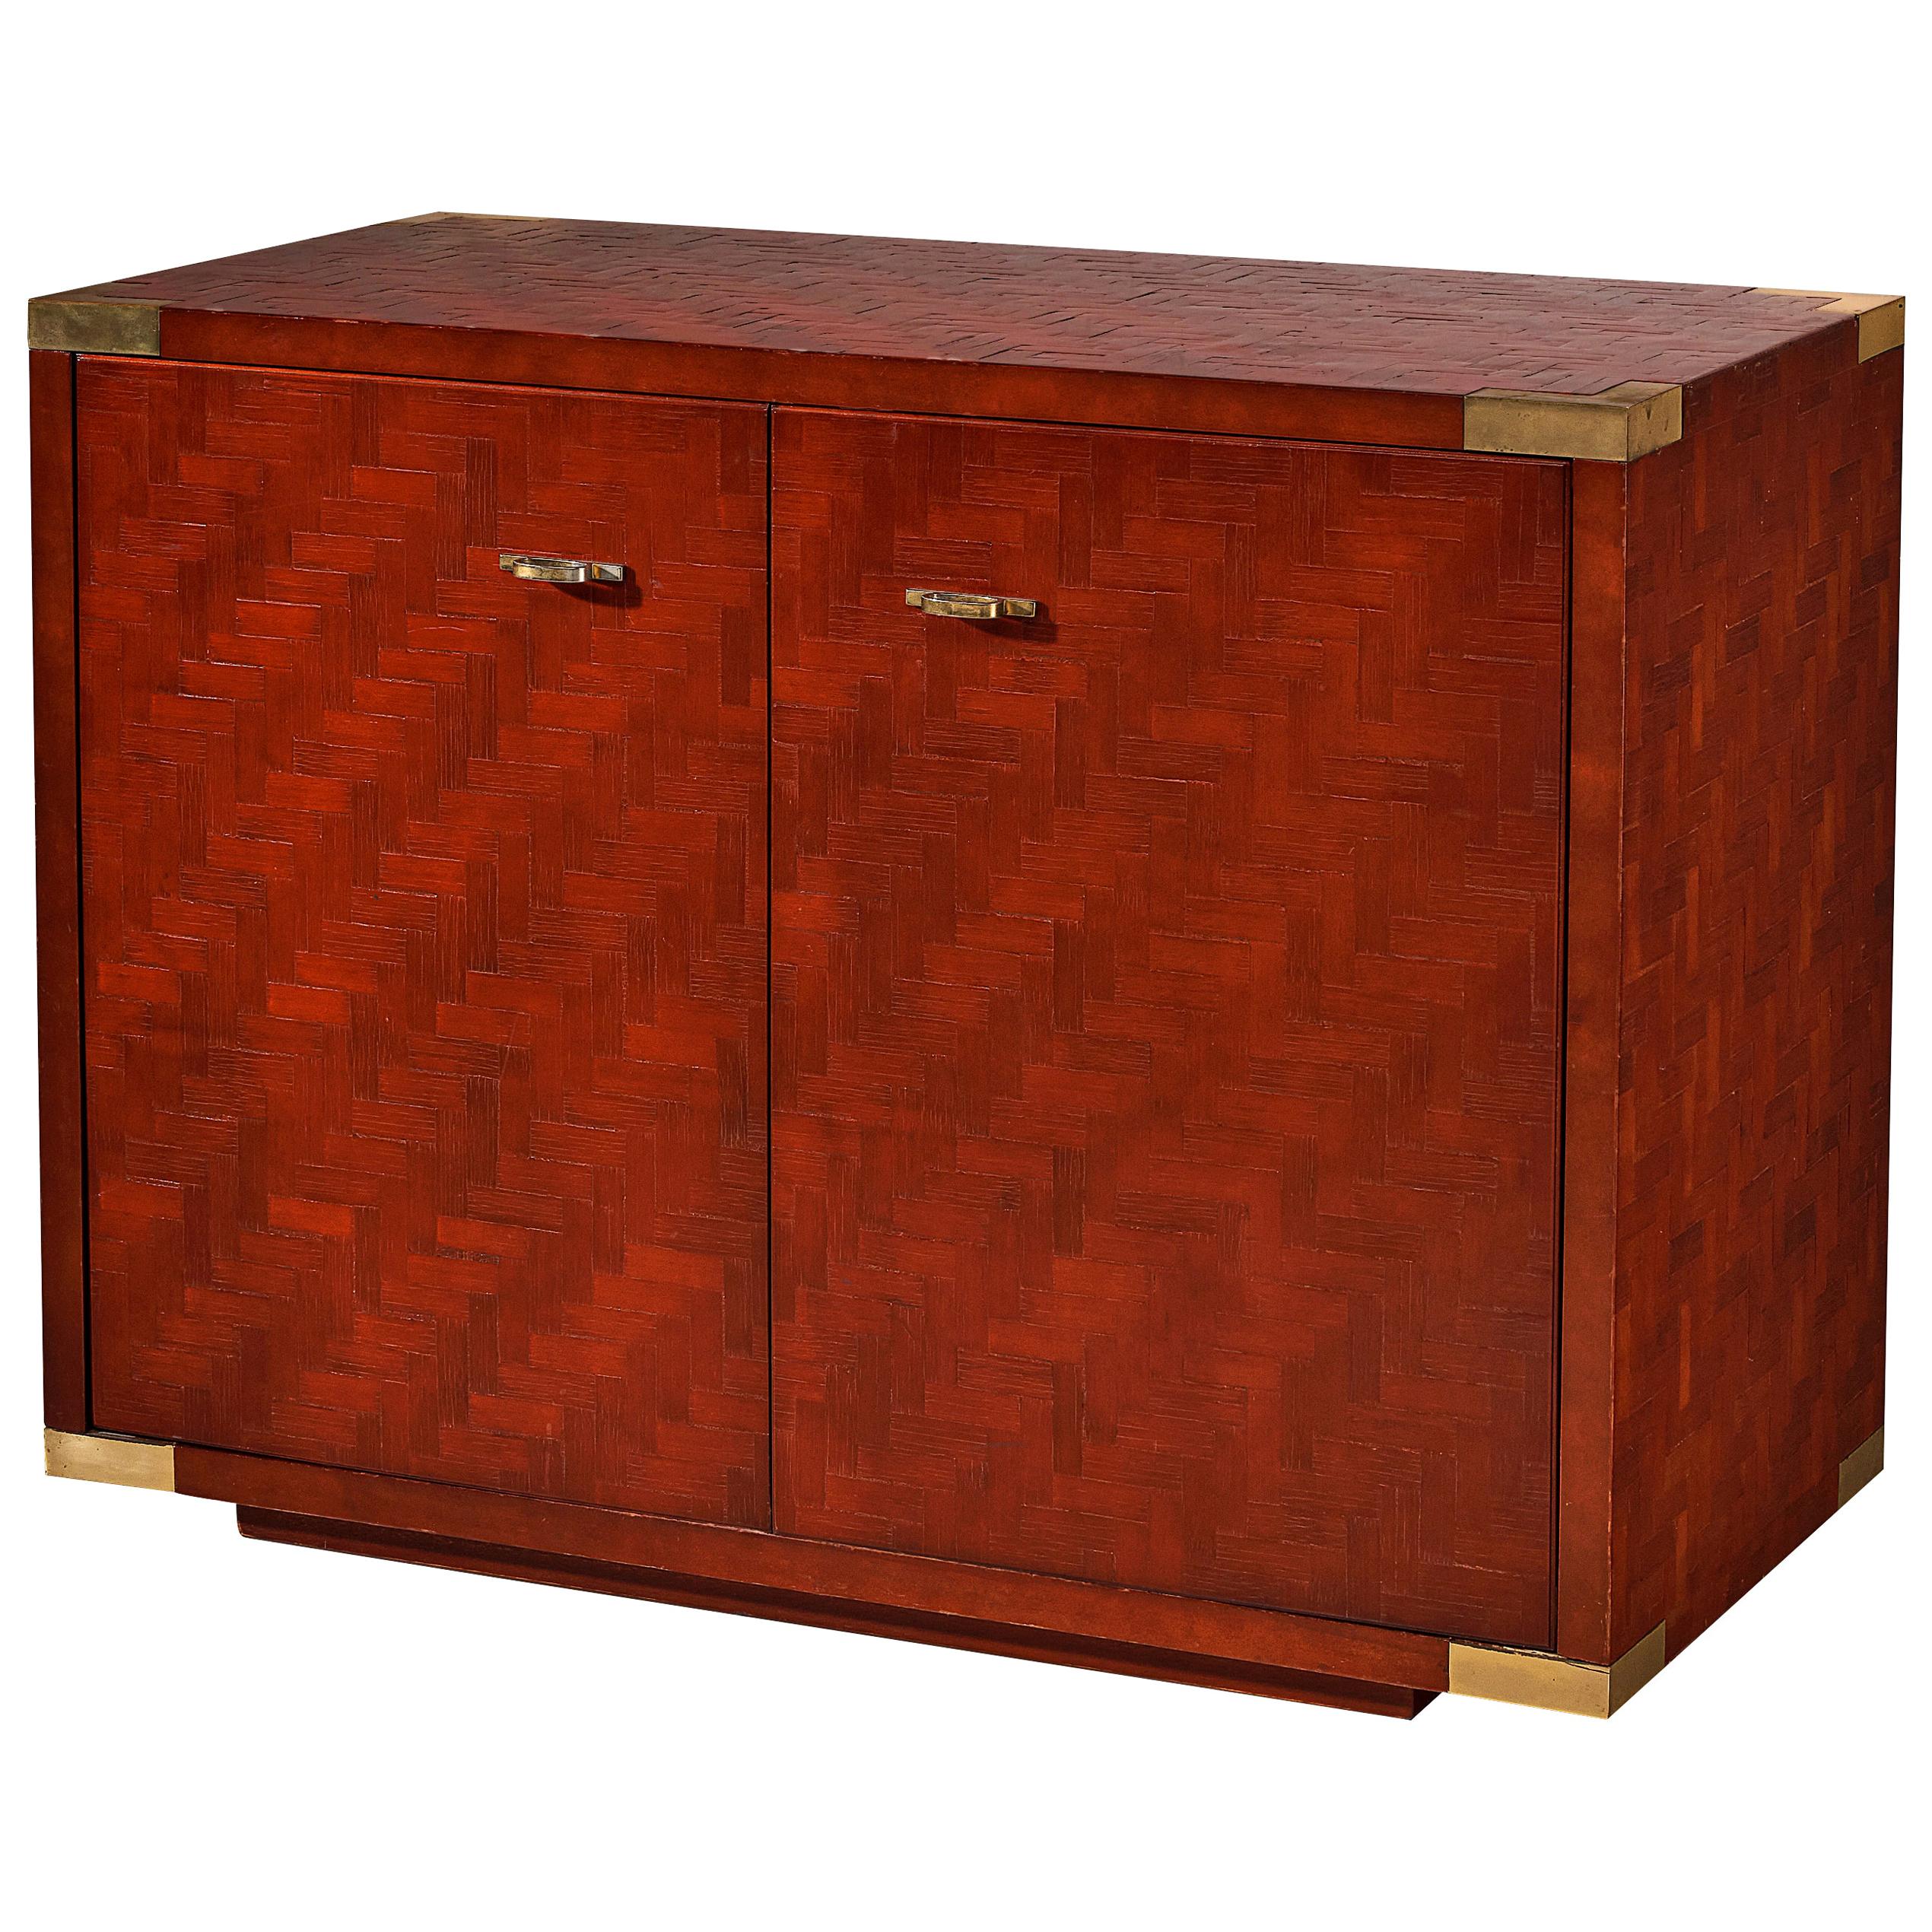 Textured Red Cabinet with Lacquered Surface and Brass